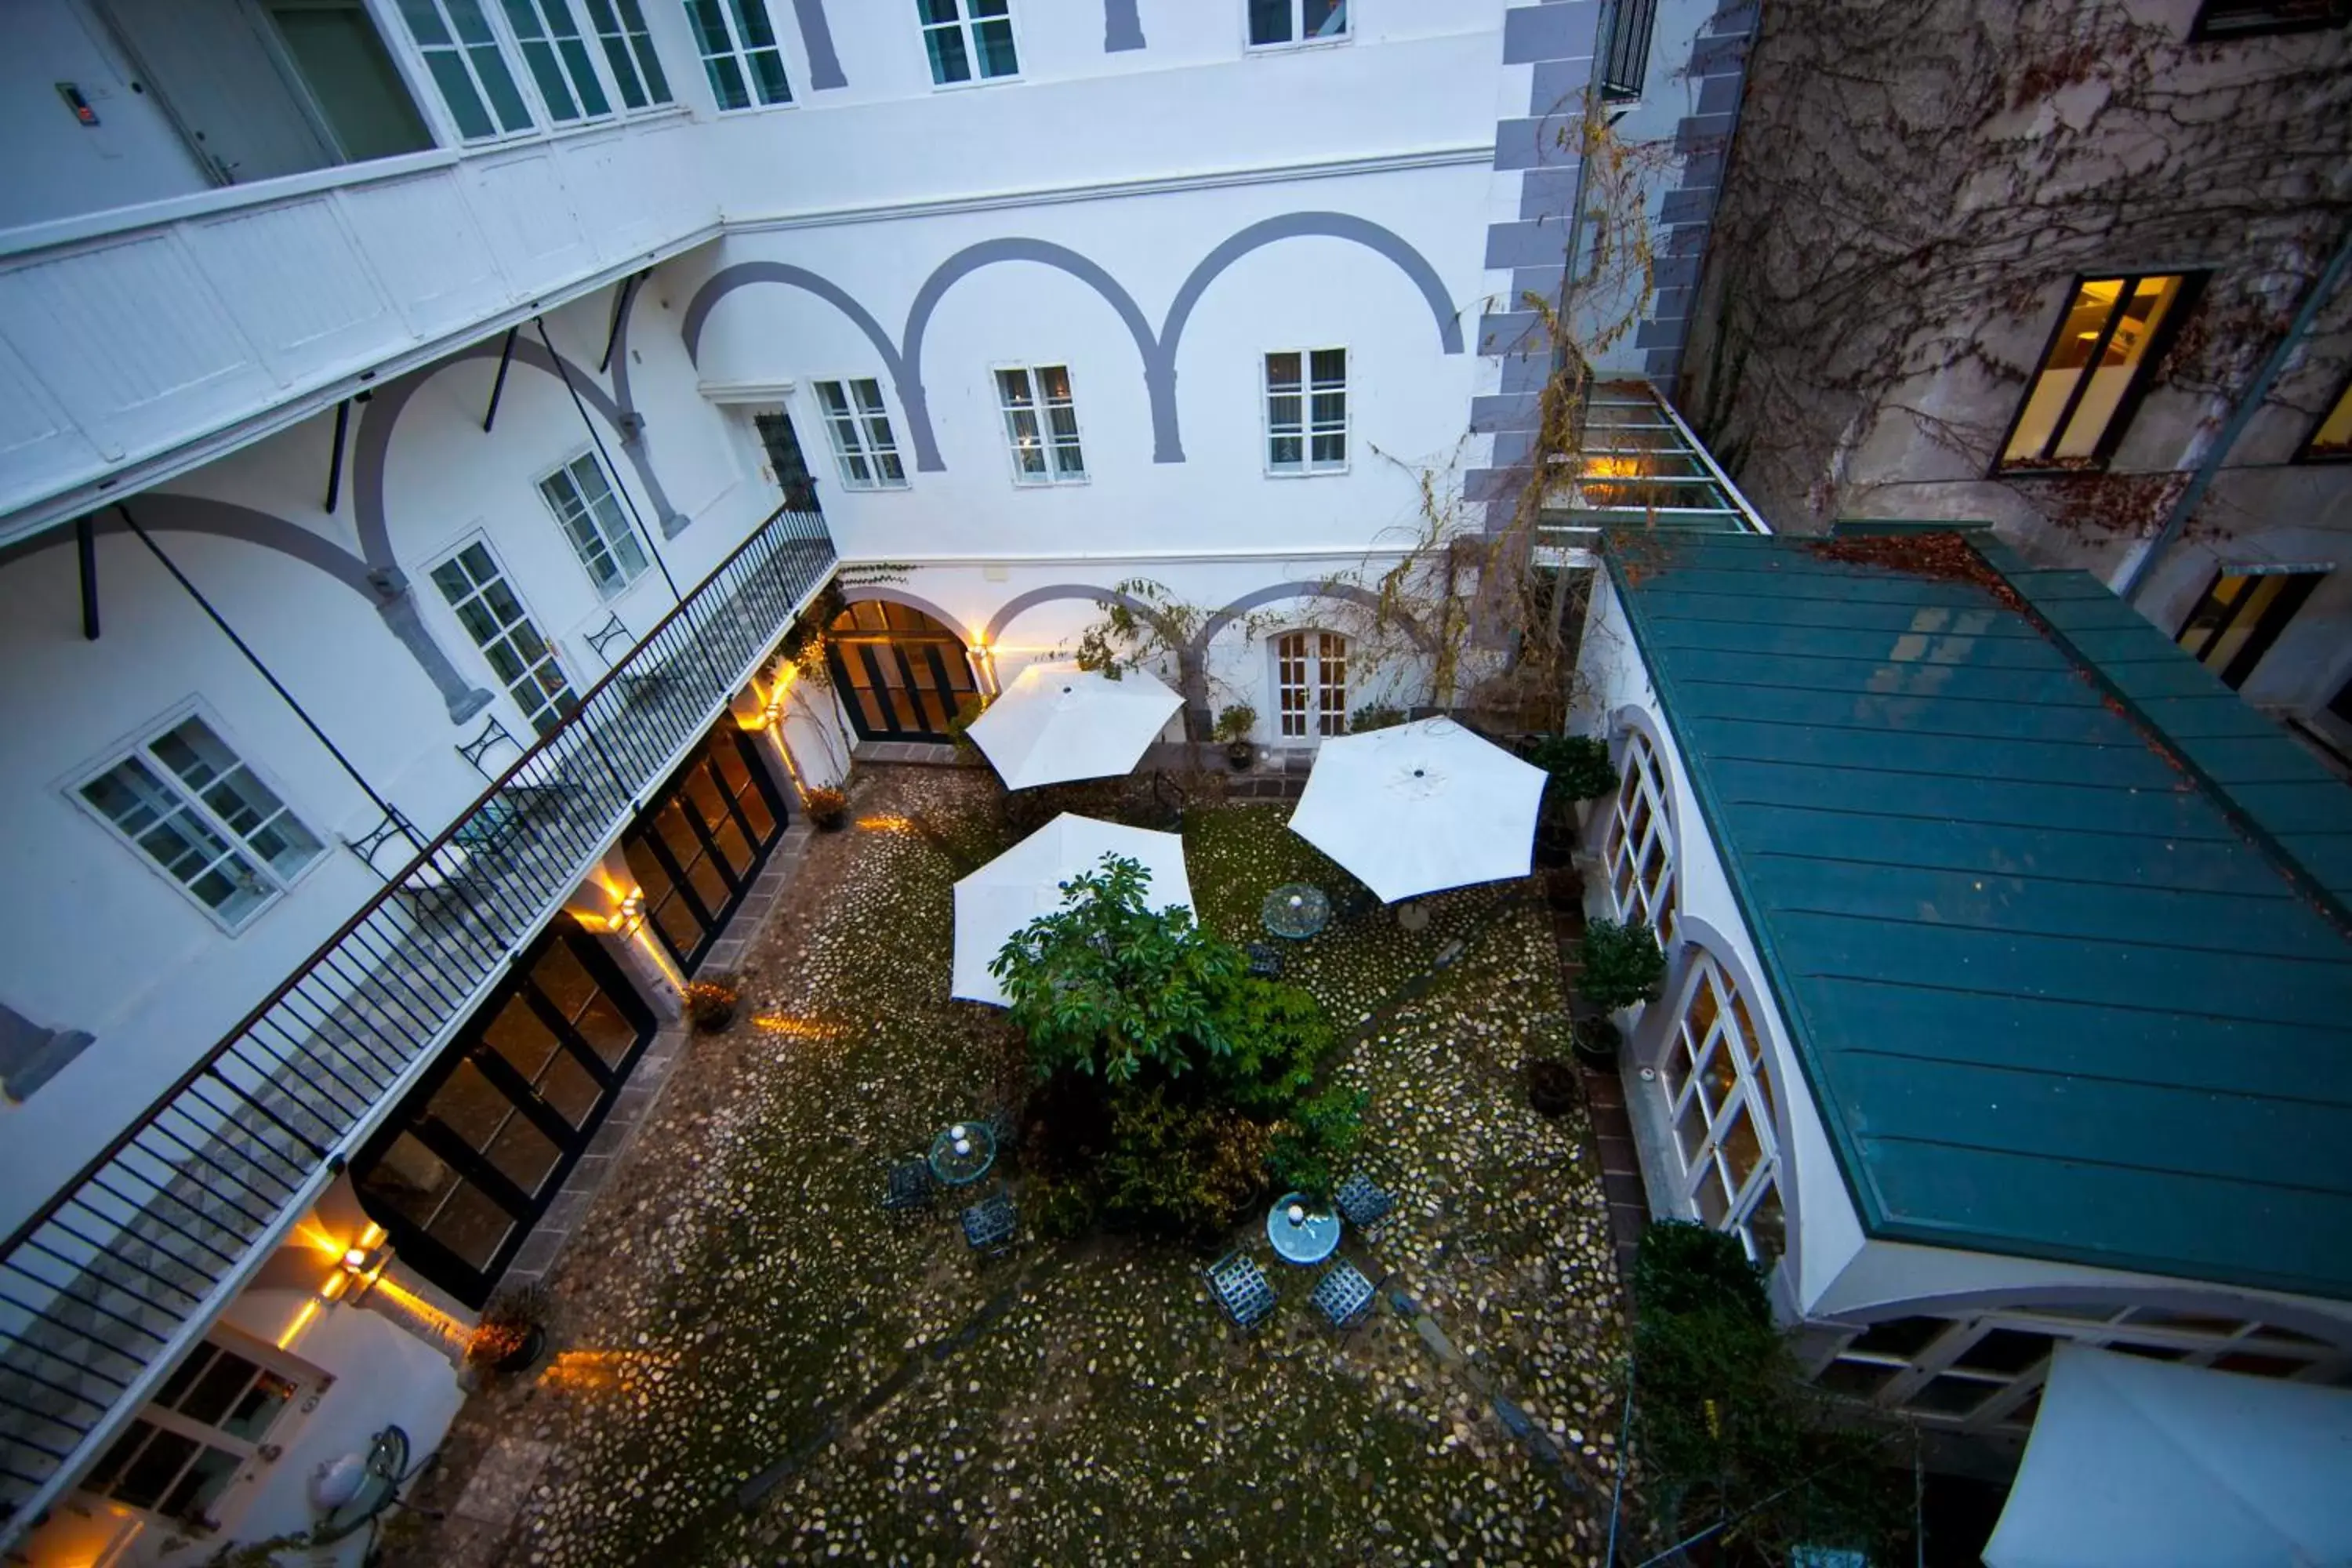 Garden, Property Building in Antiq Palace - Historic Hotels of Europe